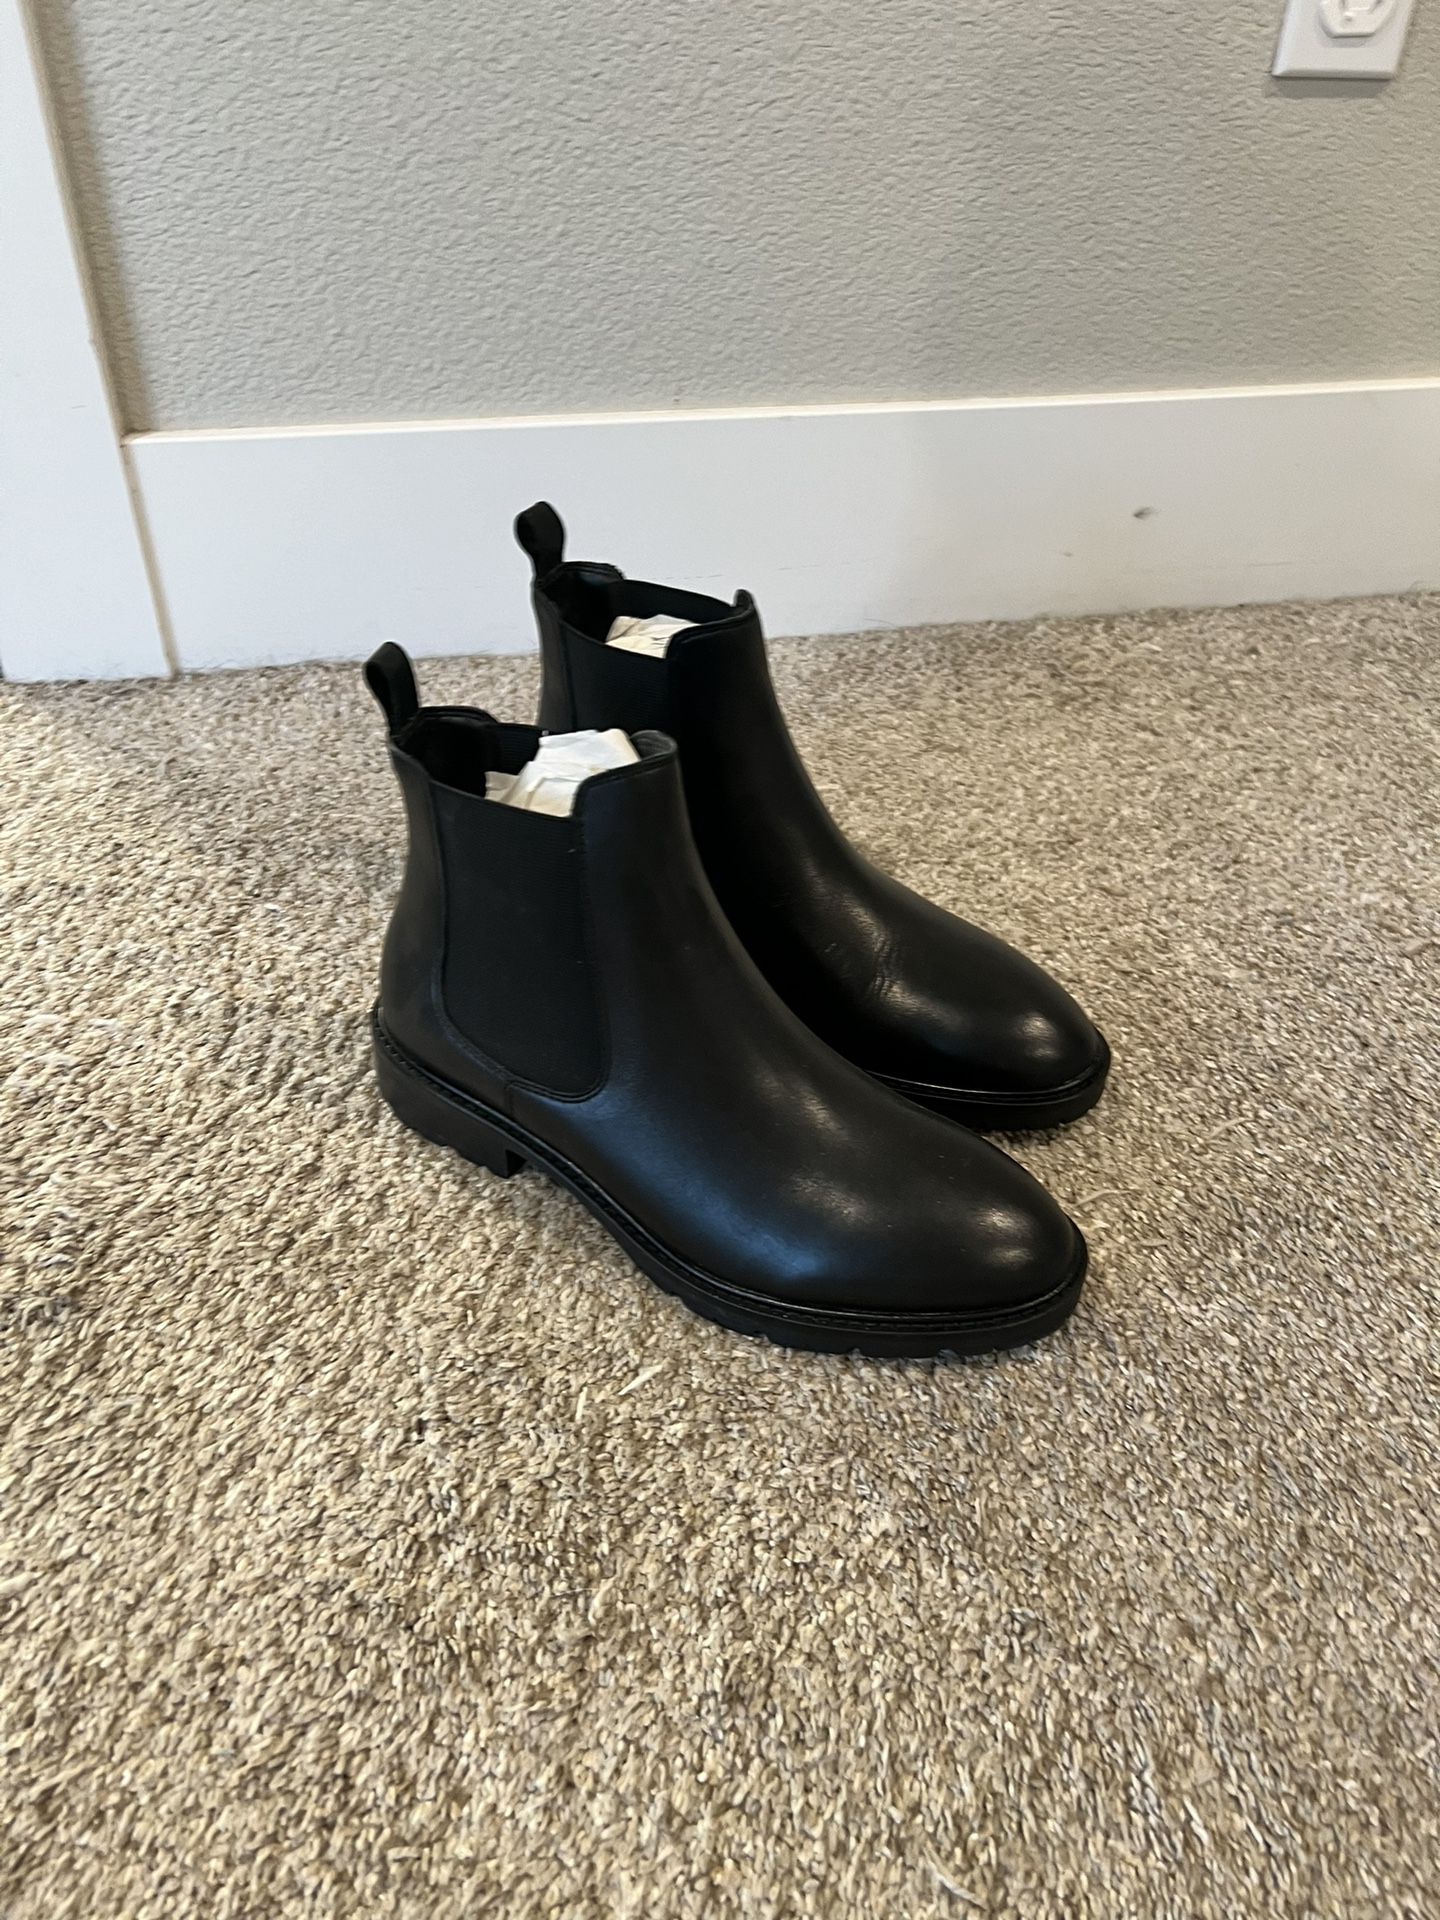 Brand New Leather Black Steve Madden Booties - Size 9